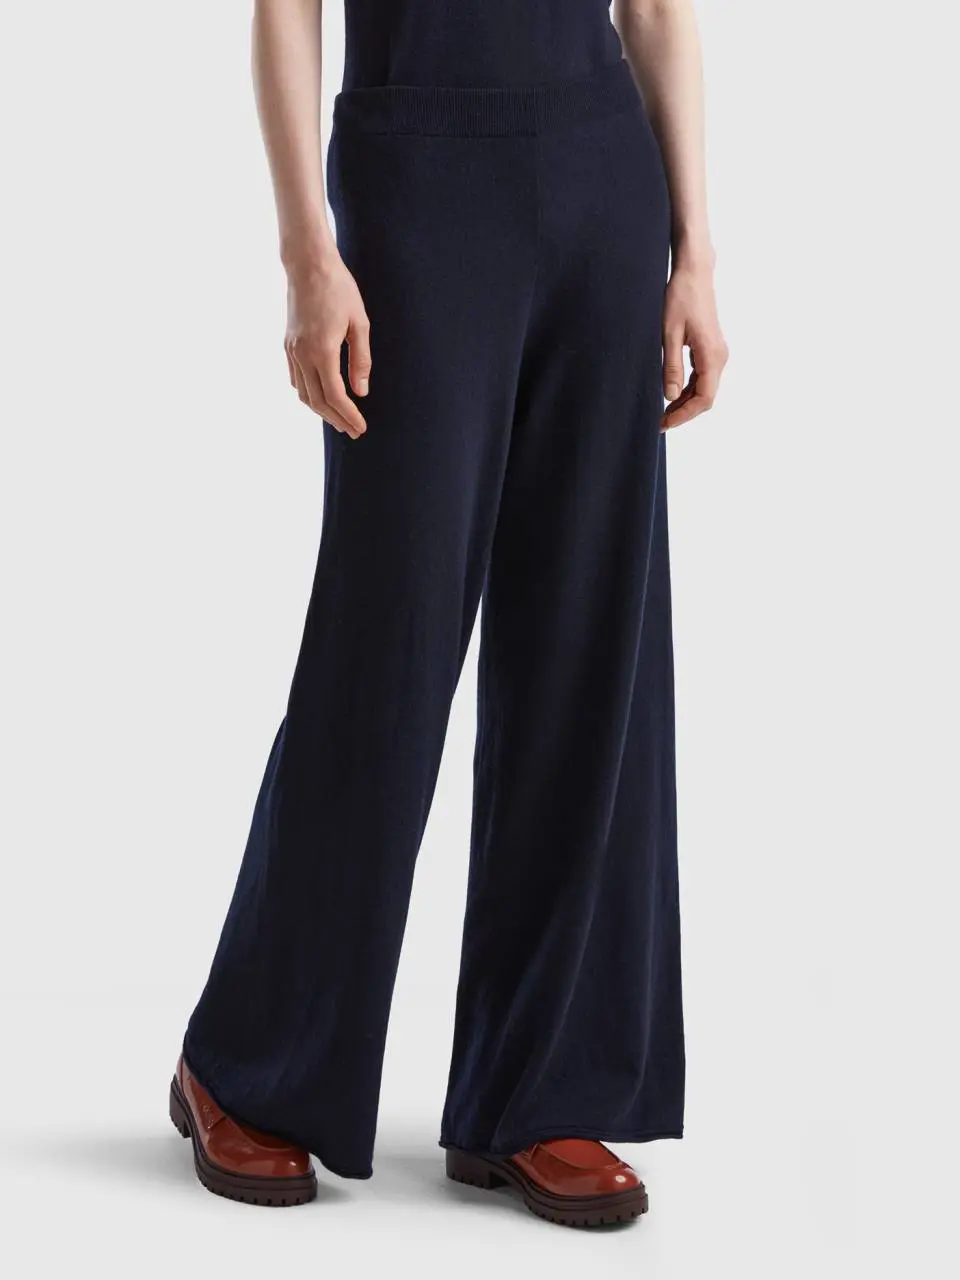 Benetton dark blue wide leg trousers in cashmere and wool blend. 1